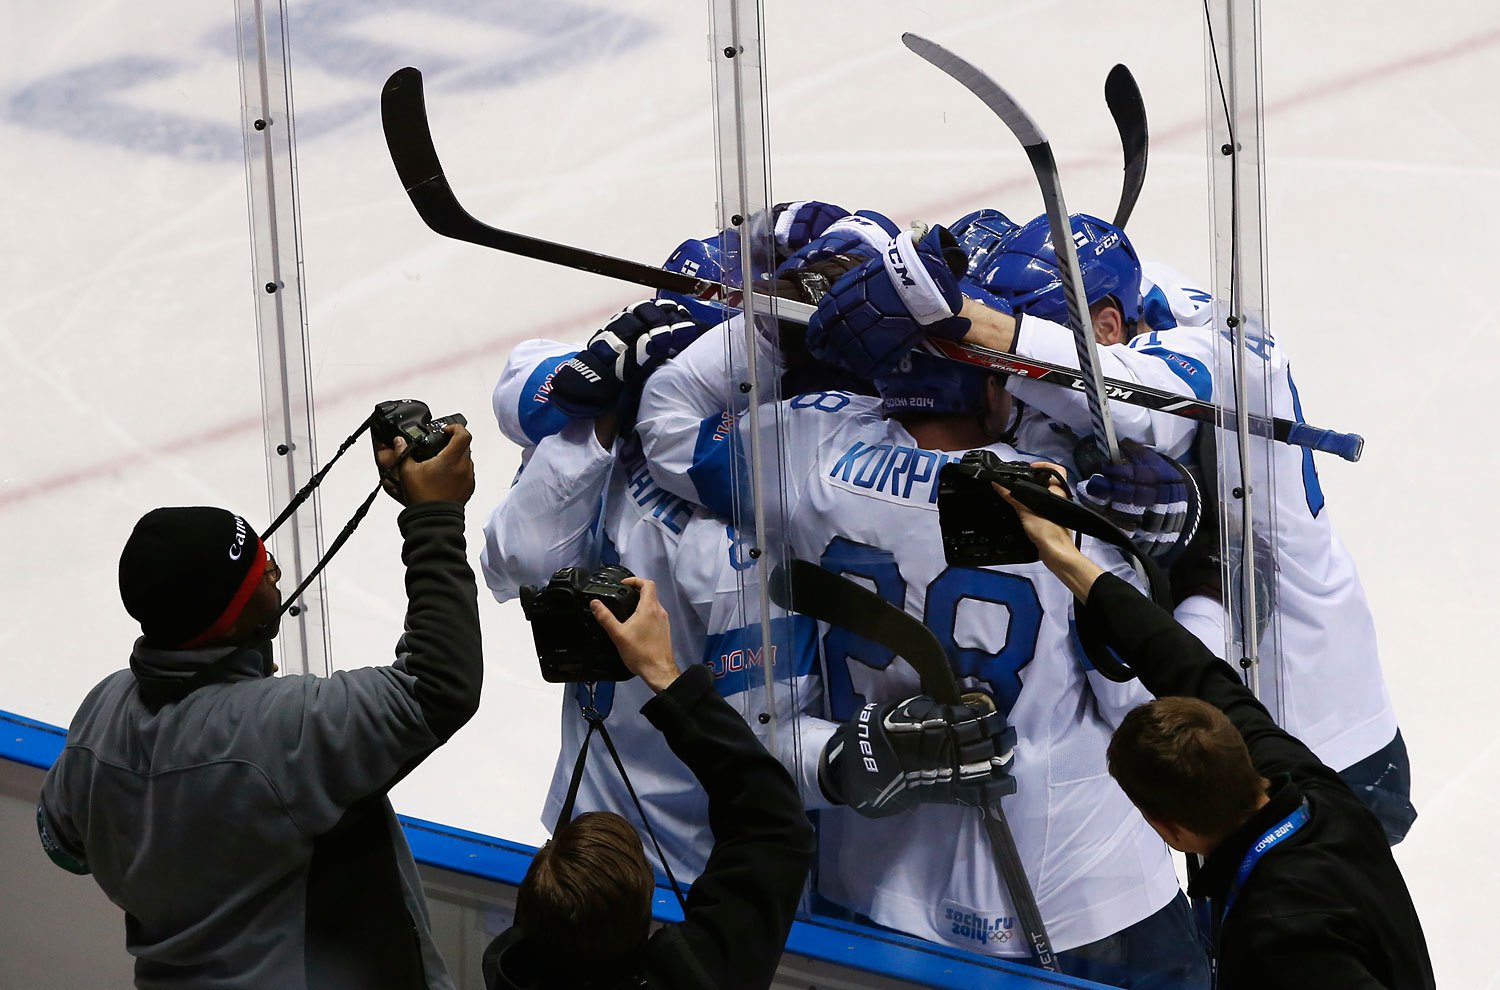 Photographers capture the celebration of Finland's Teemu Selanne and his linemates after he scored against Team USA during the second period of their men's ice hockey bronze medal game.